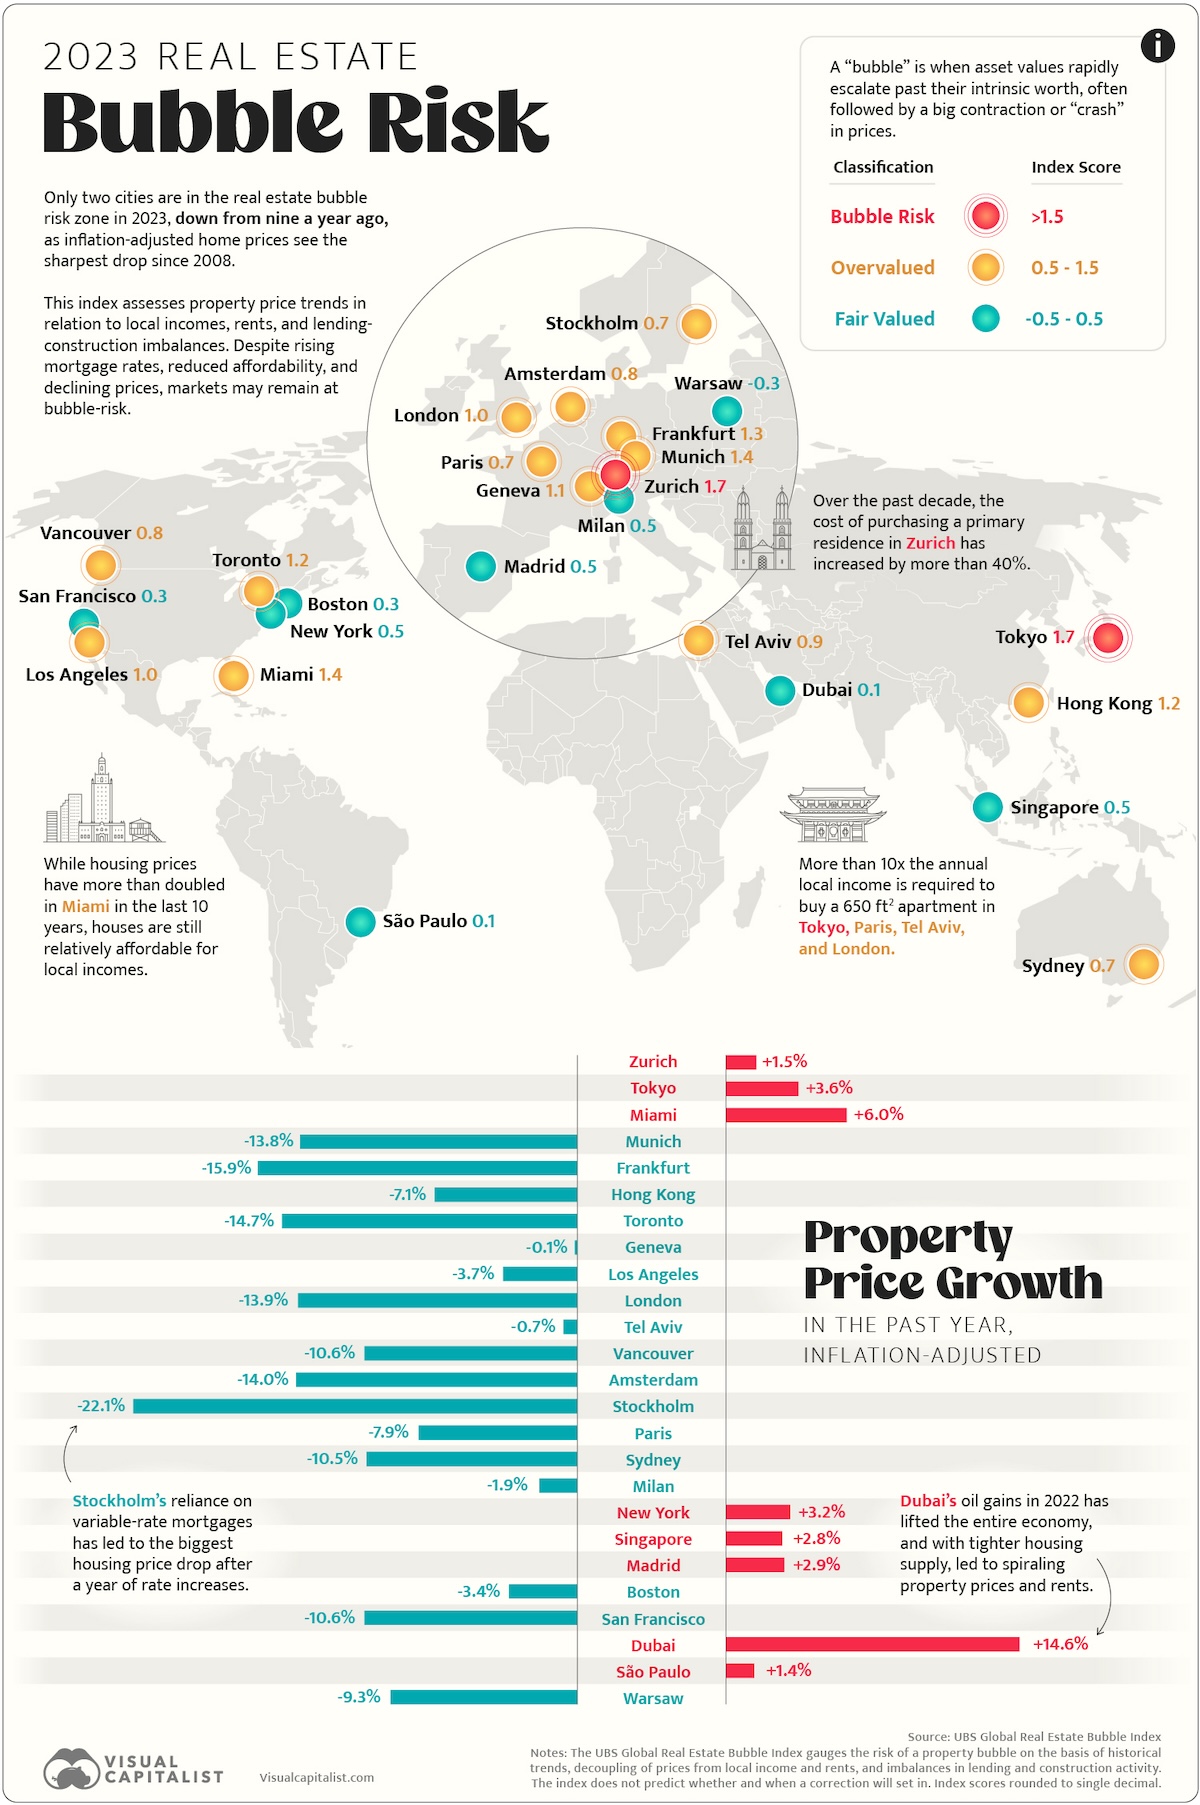 A map showing the bubble-risk rating of 25 major property markets along with a bar chart showing housing price growth YoY.